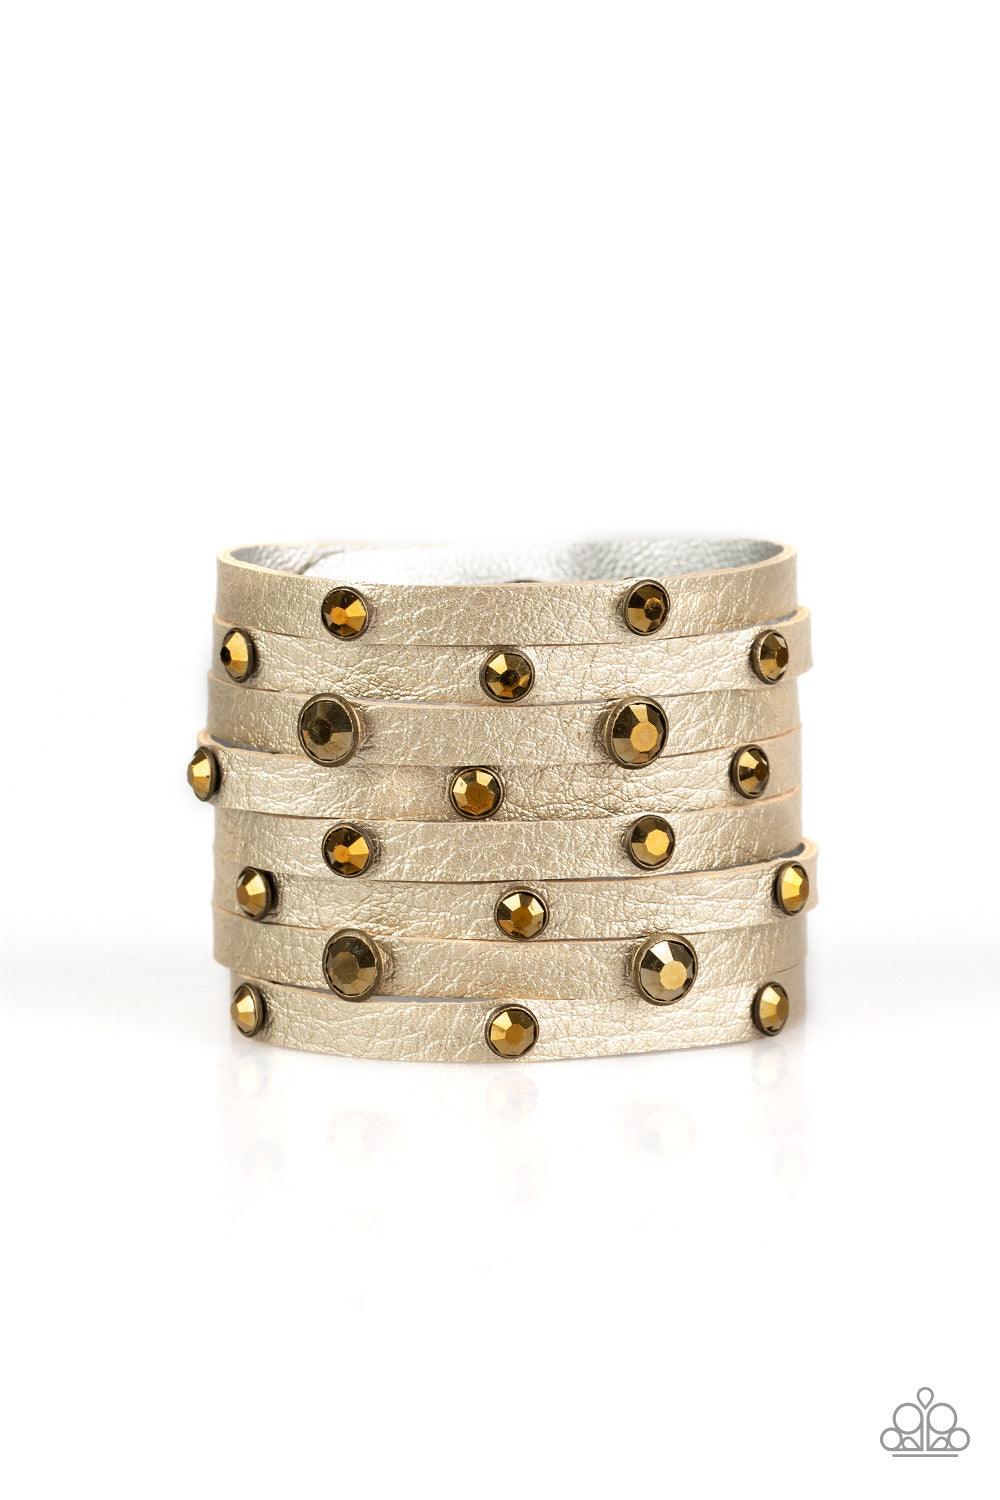 Paparazzi Accessories Go-Getter Glamorous - Brass Brushed in a metallic shimmer, a thick leather band has been spliced into eight strips across the wrist. Encased in sleek brass fittings, glittery aurum rhinestones are sprinkled across the center for a sa